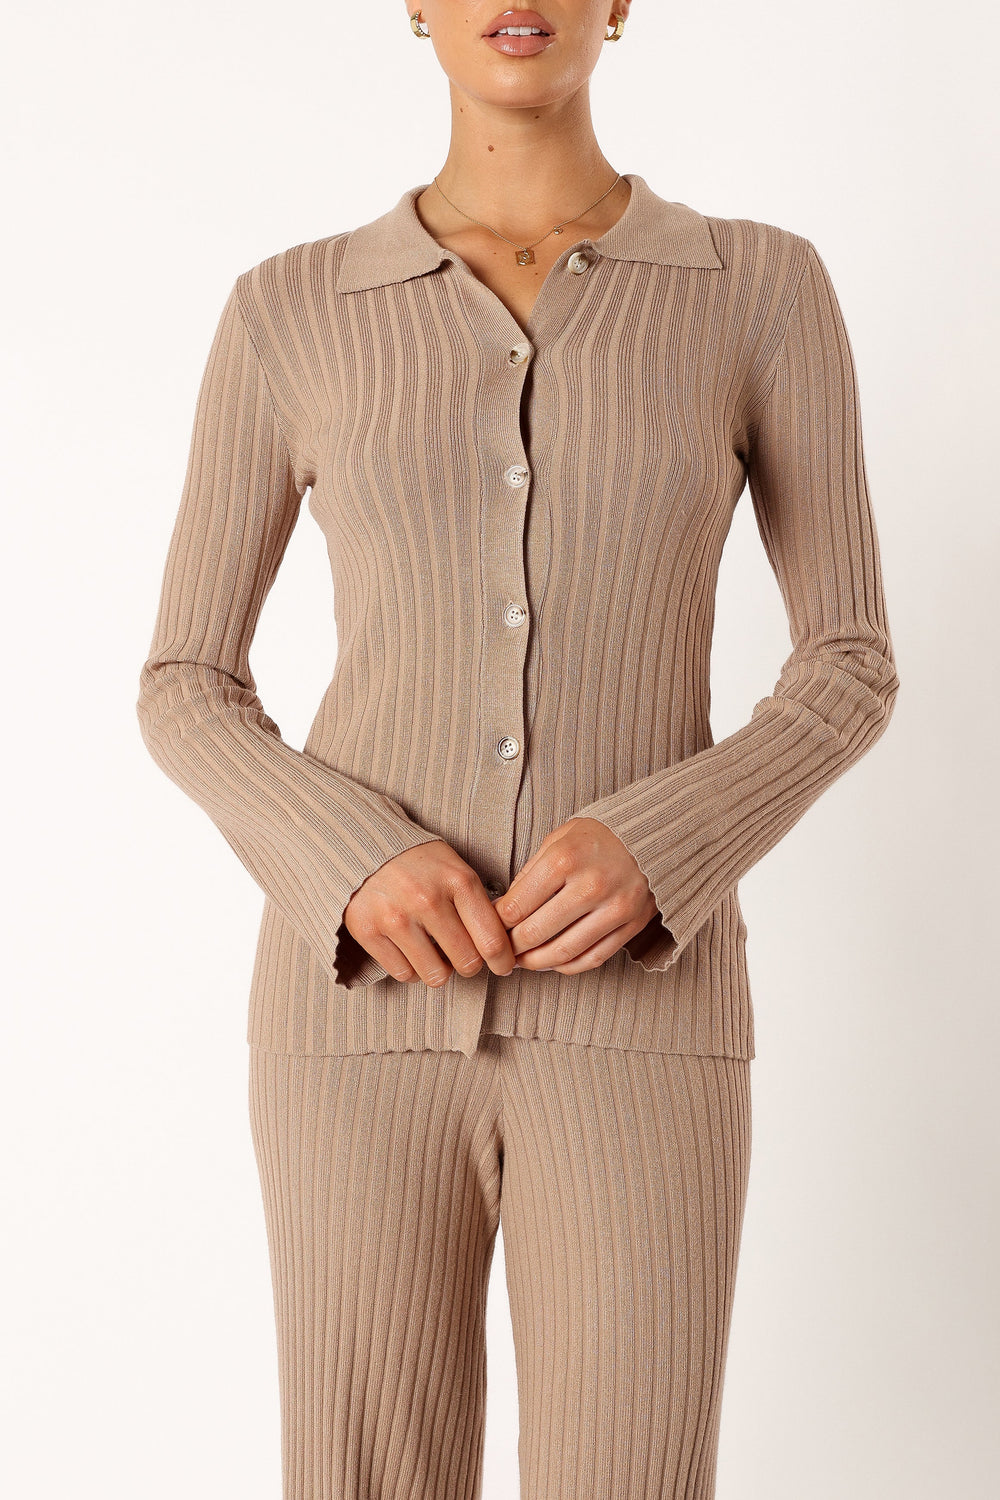 MATCHING RIB KNIT SET TREND - NOT JUST FOR LOUNGING IN - VP of STYLE